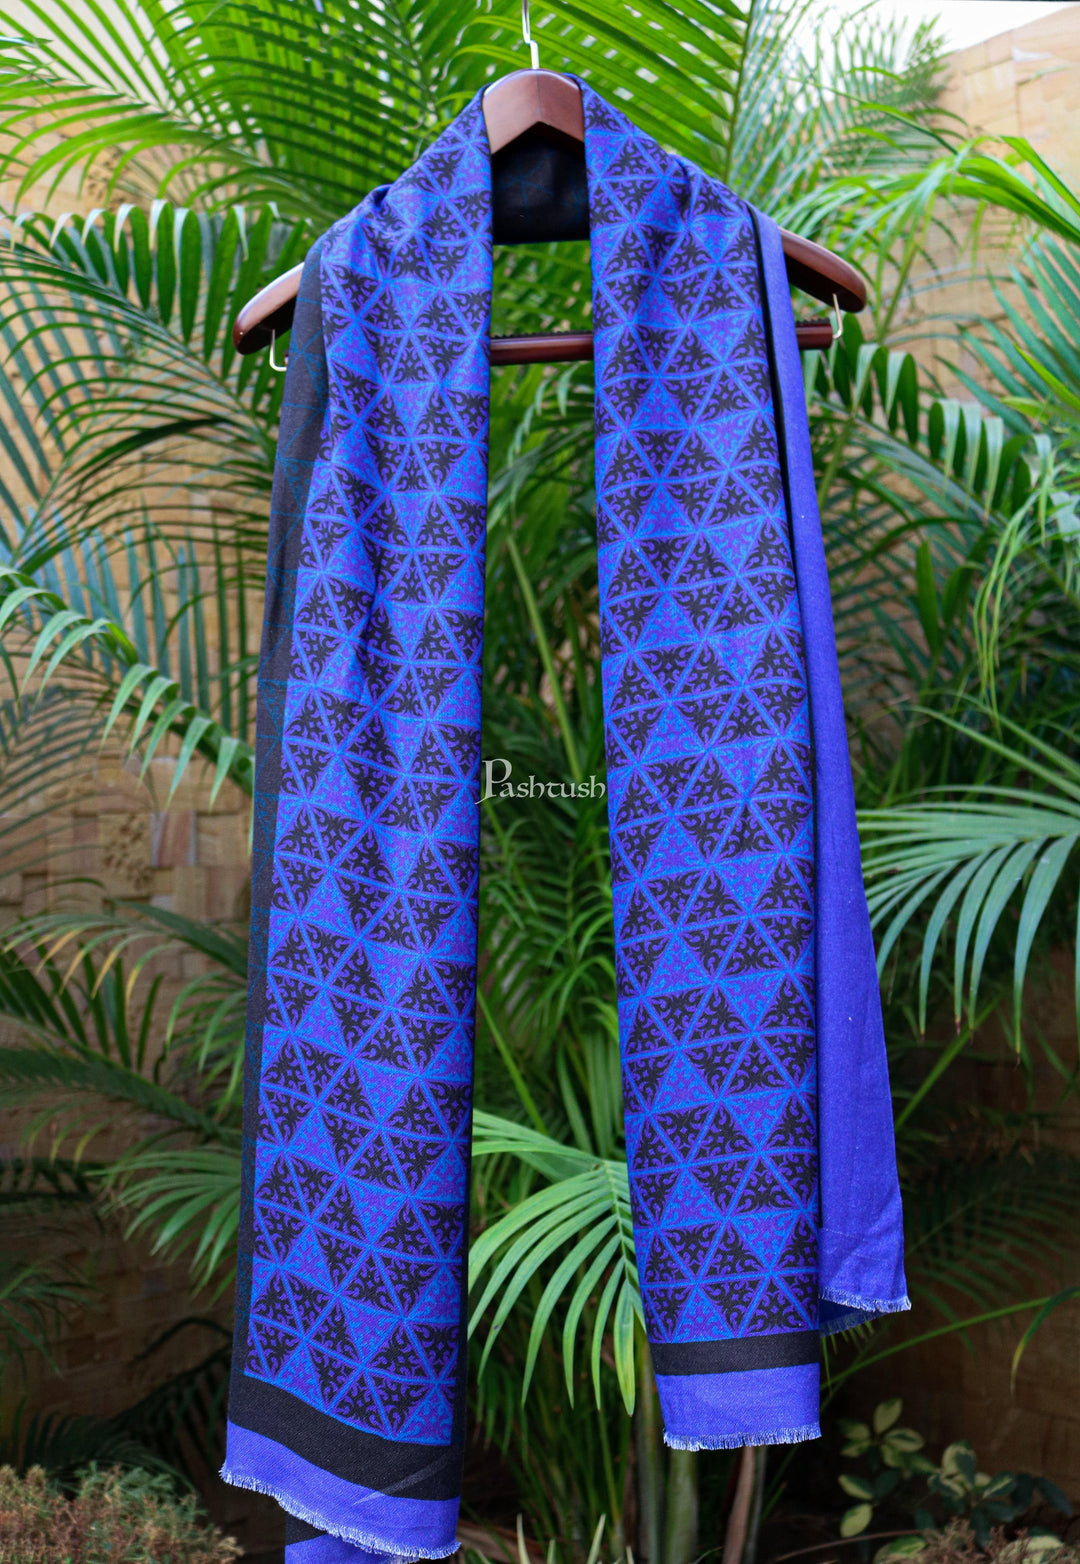 Pashtush India Womens Stoles and Scarves Scarf Pashtush women Bamboo stole, Printed design, Black And Blue